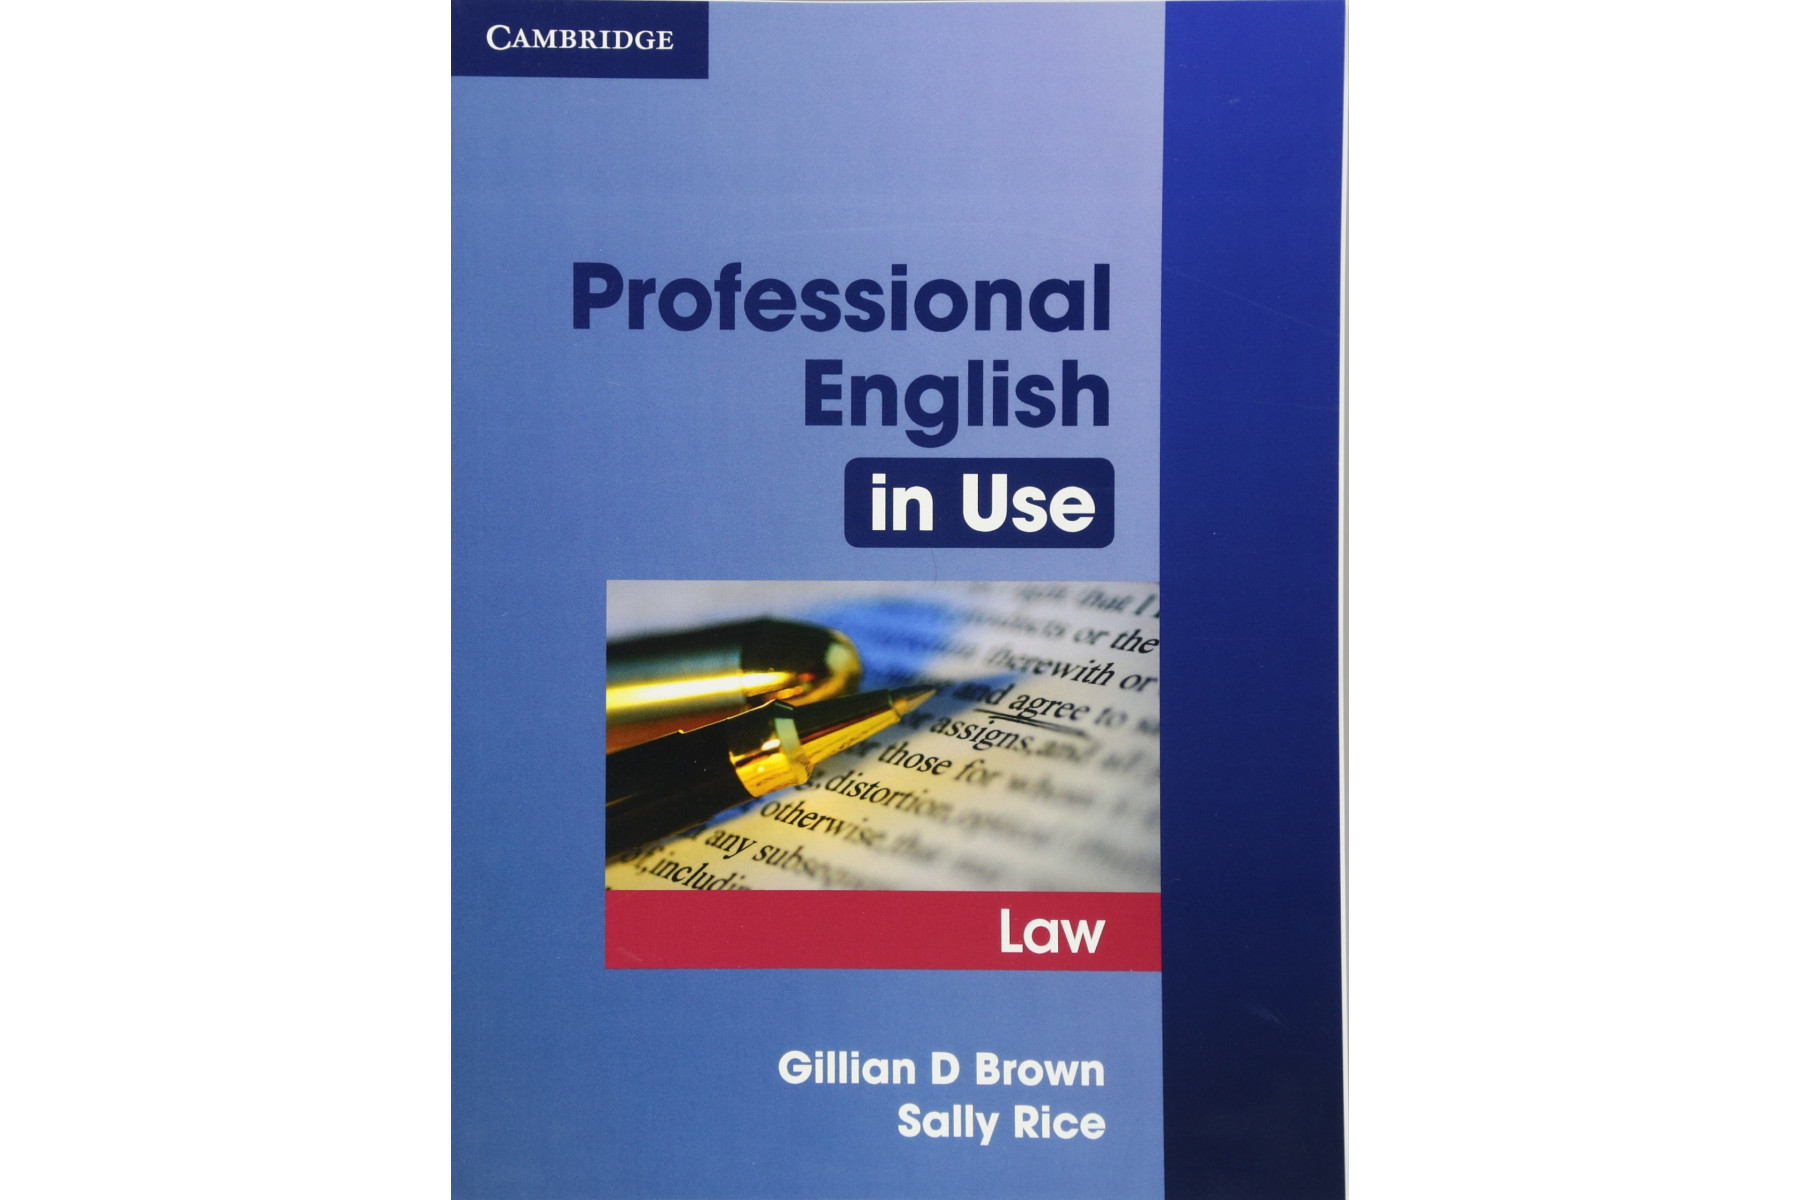 Professional english in Use Law